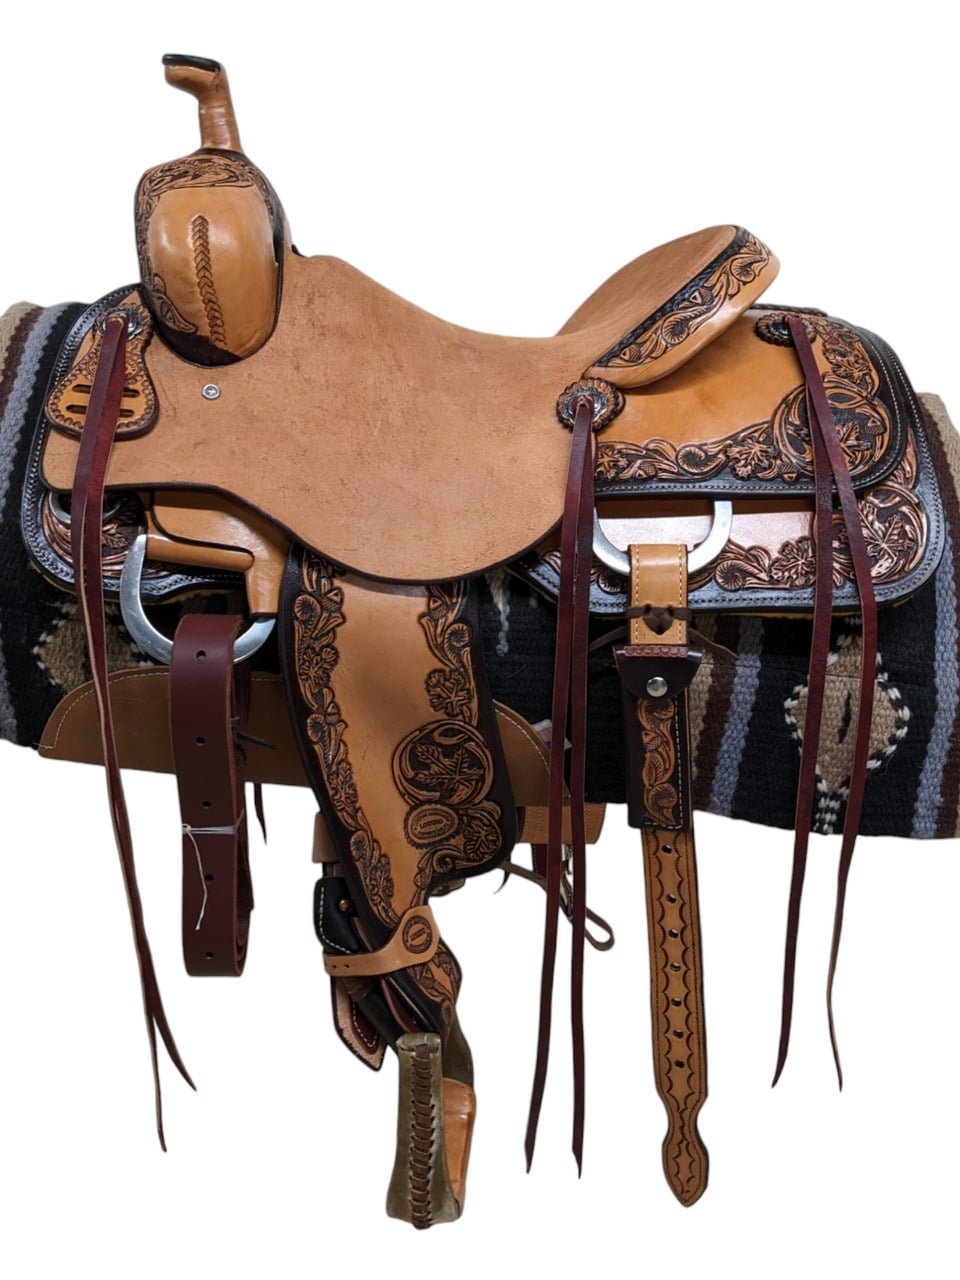 Saddle Features Handcrafted leaf and acorn tooling Antique finish and border trim Natural leather Jeremiah Watt Conchos Rough-out seat jockey and seat for grip Smooth fenders Hard Seat Matching Rear Cinch Double loop latigo keeper Hoof pick holder Saddle strings Saddle Specifications Cantle height: 3.5" Skirt Length: Approx. 28.5" Approx. Weight: 40 lbs Seat Size: 15.5" Tree Size: 16" Gullet: 7"